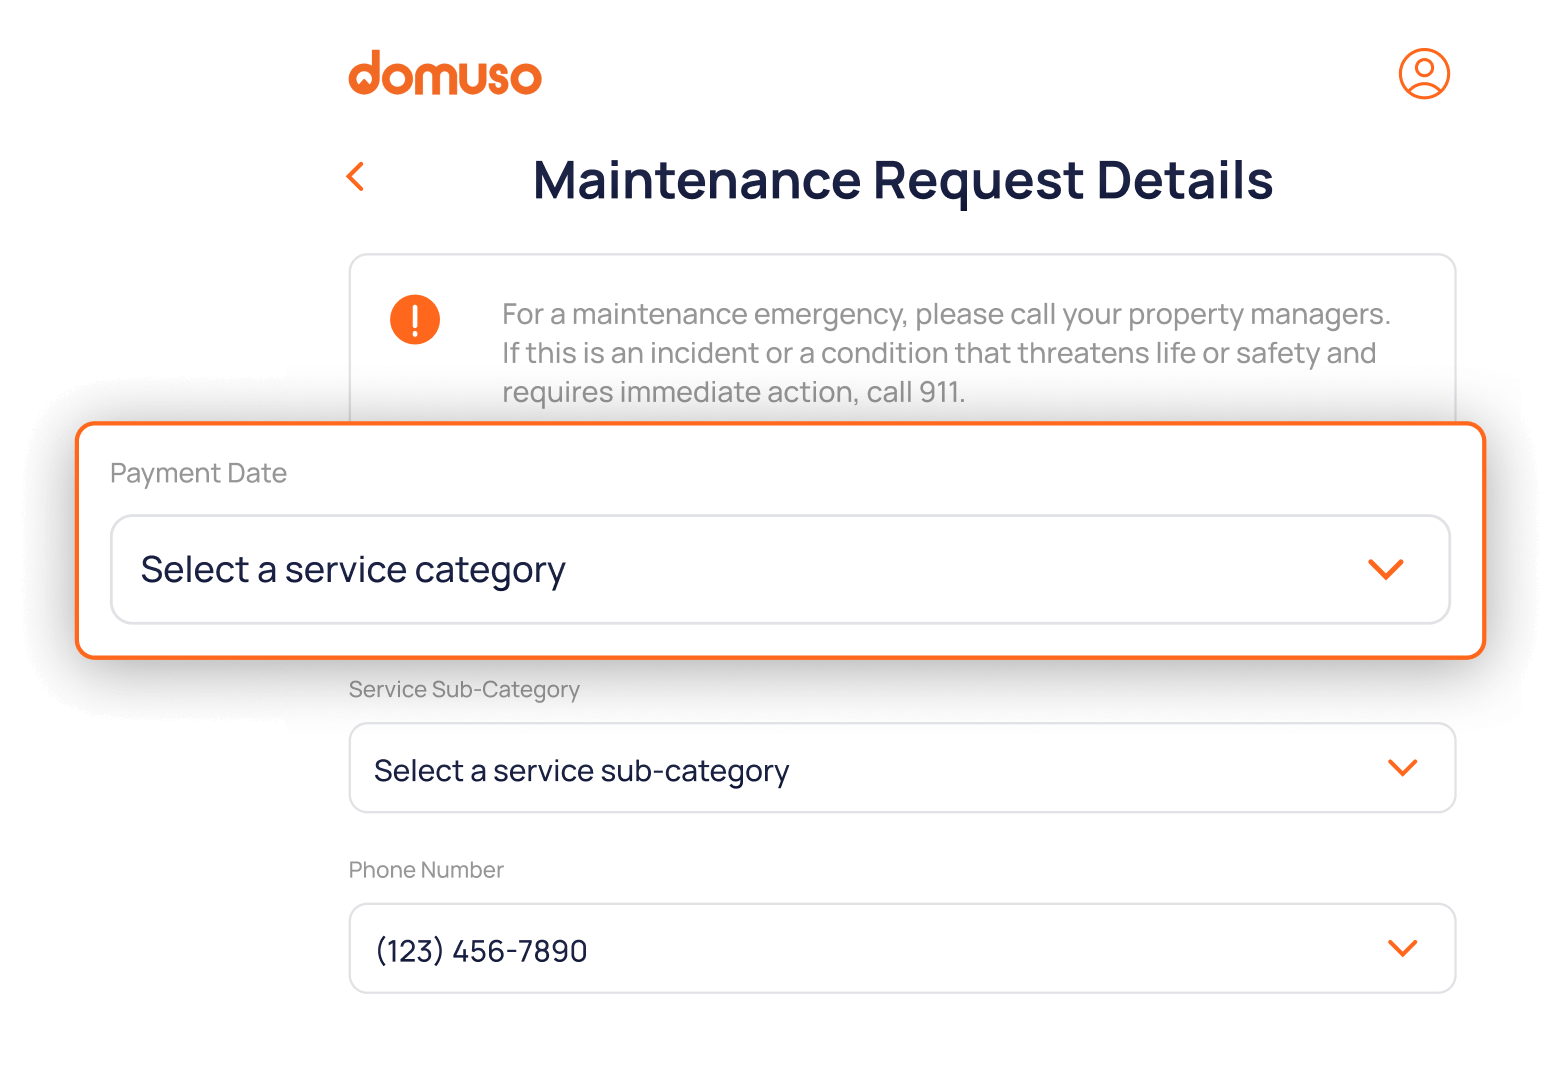 Submit all maintenance requests online.